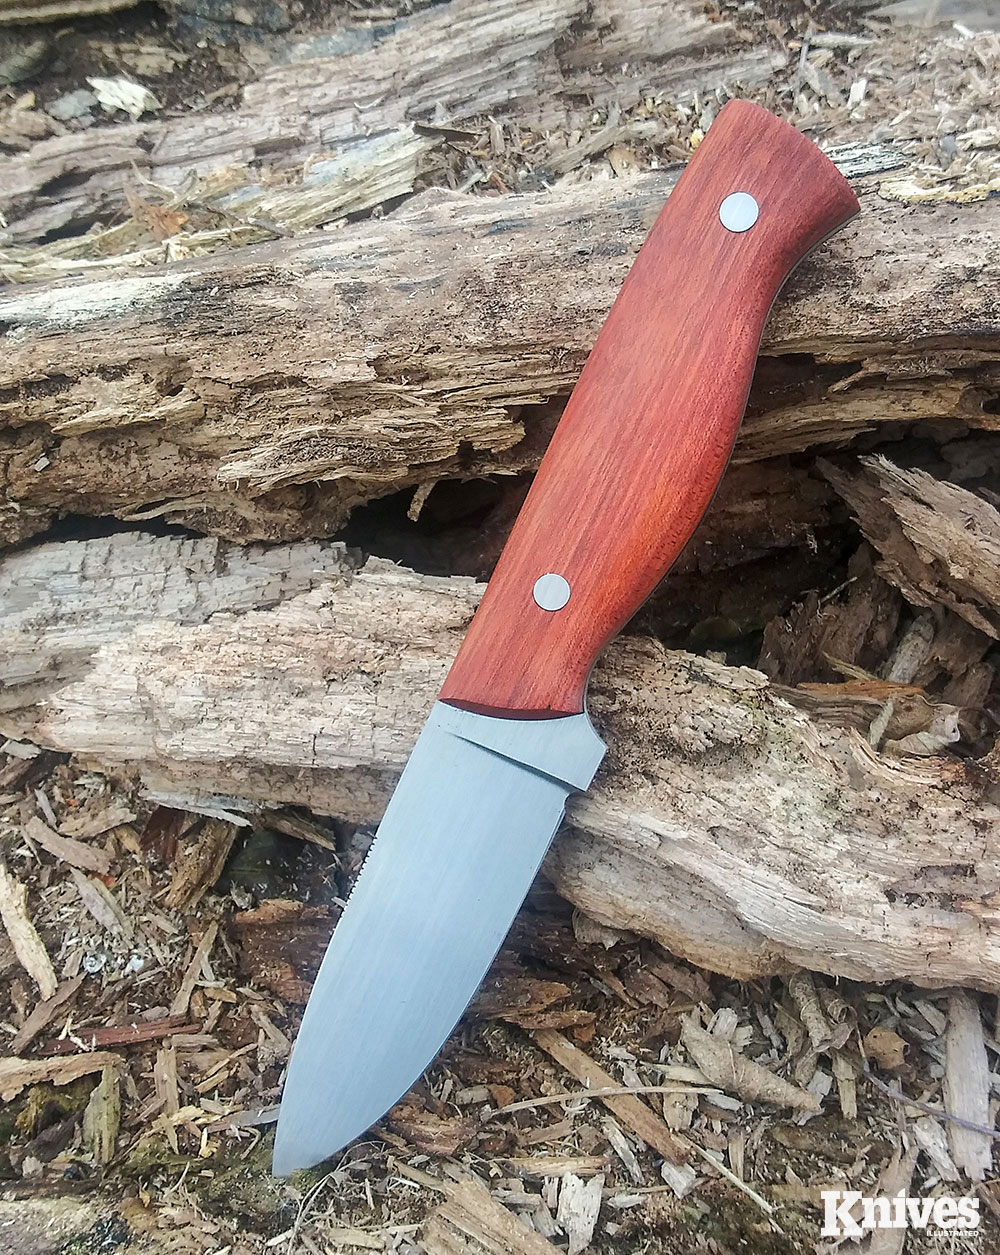 The Bushcrafter is right at home in the outdoors, providing you with a solid, dependable tool.